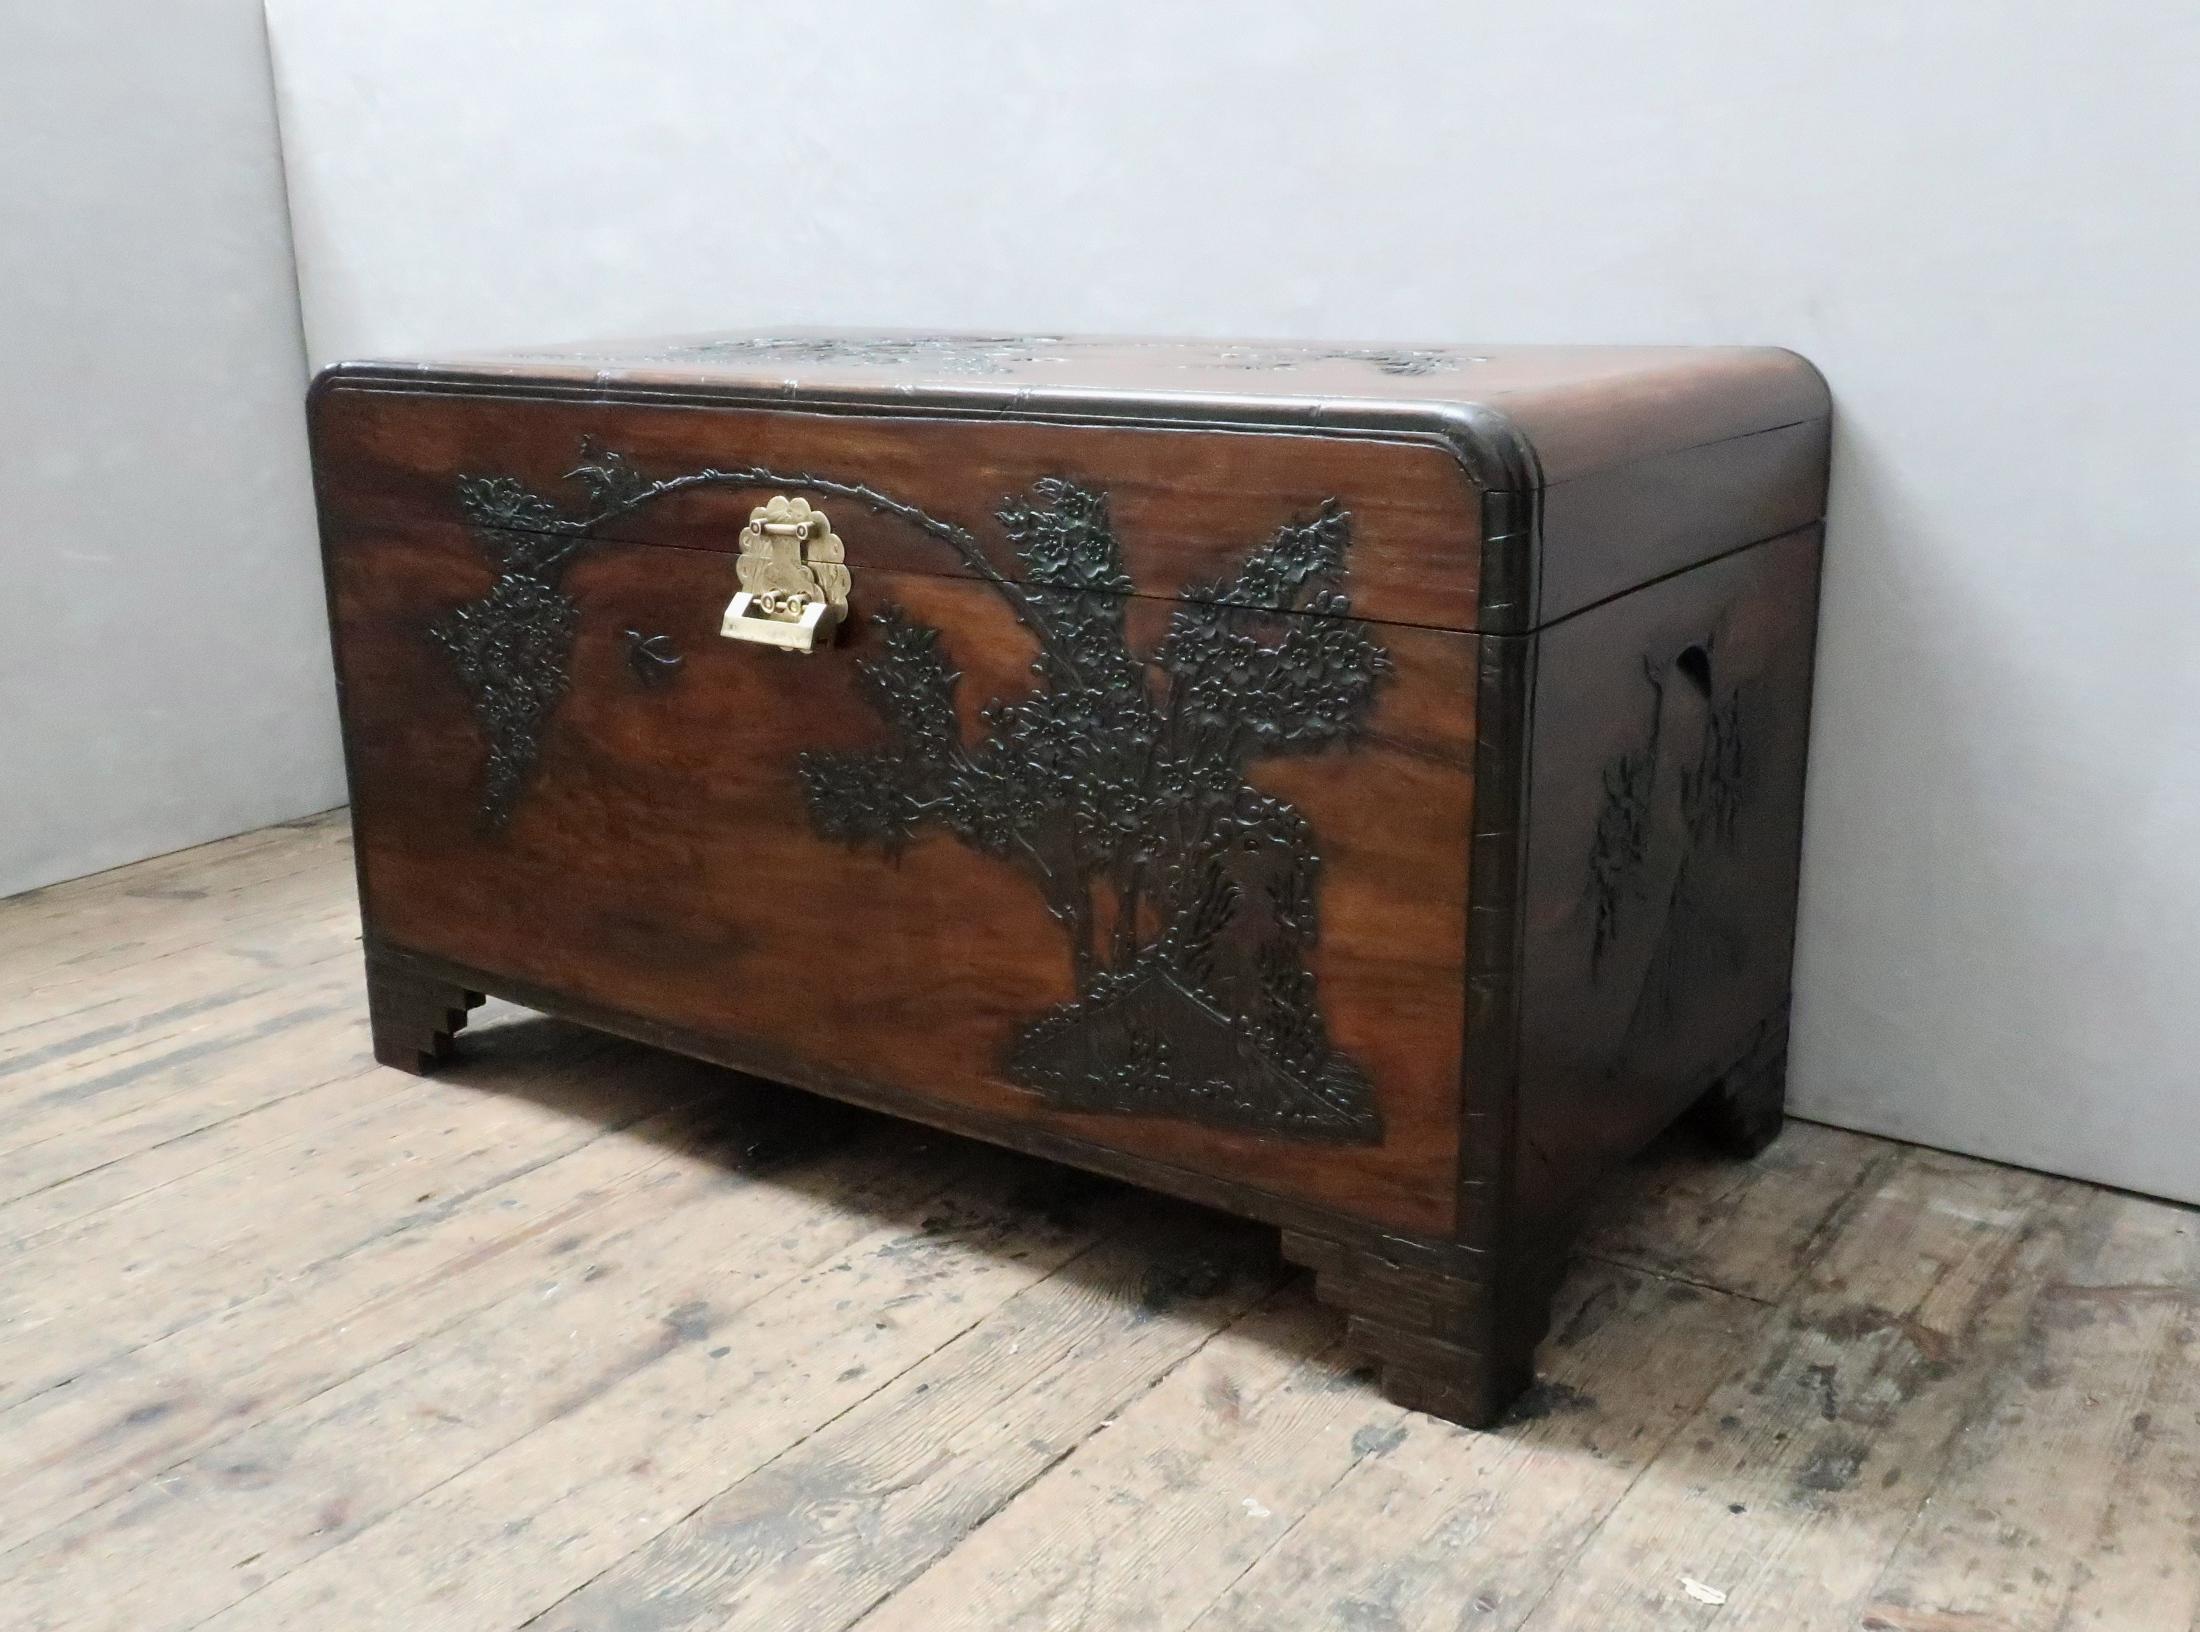 A very good quality early 20th century oriental freestanding camphor wood chest with relief carving of cherry blossom trees, birds and flowers to all four sides and top with simulated bamboo carved edges stood on simulated bamboo carved bracket